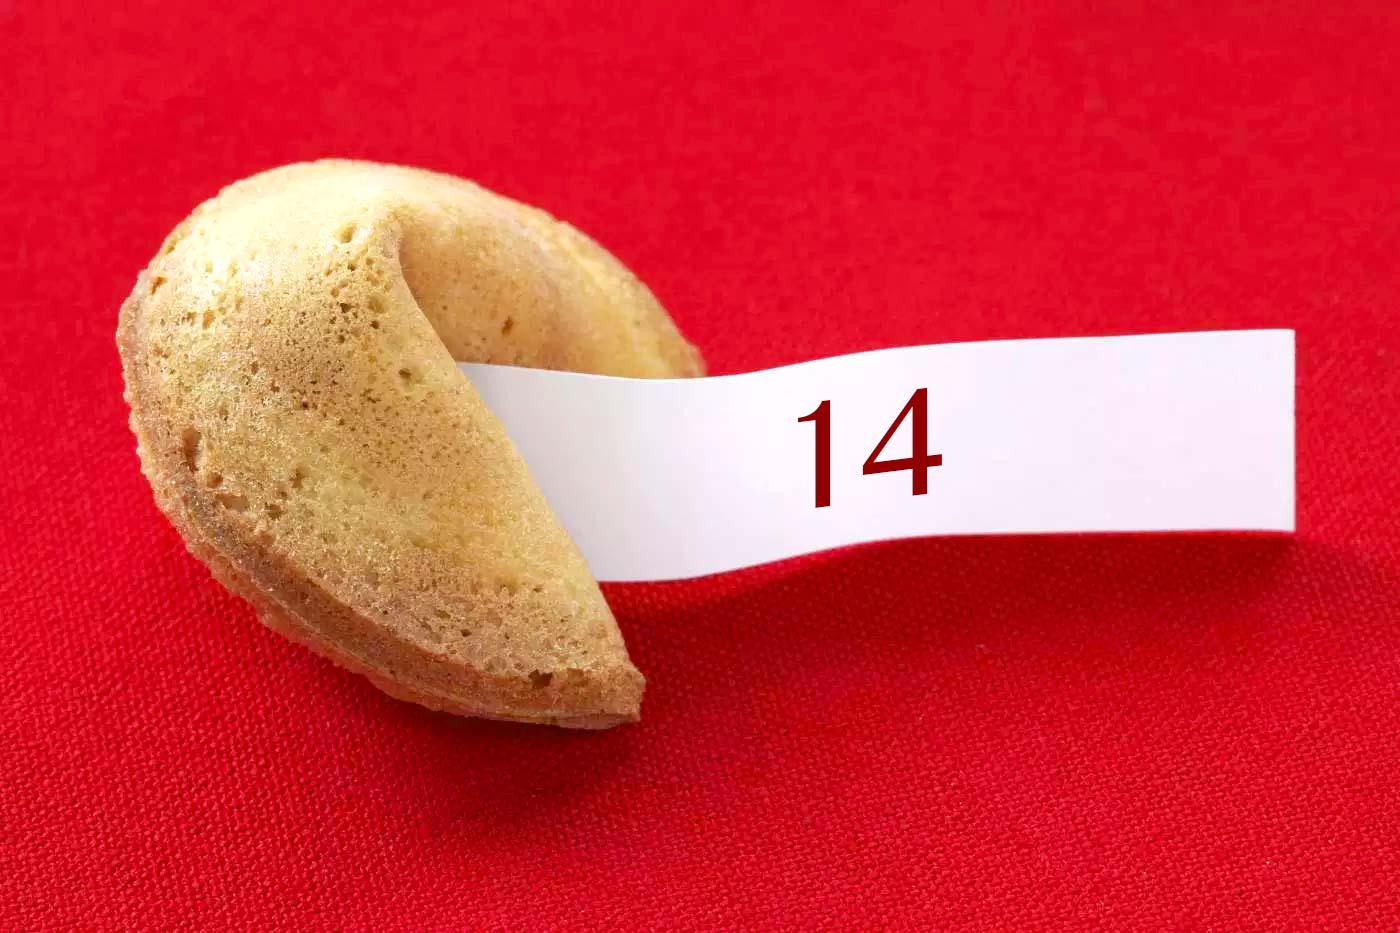 Let’s See What Your Food IQ Is – Can You Get 80% On This Quiz? Fortune Cookie 14